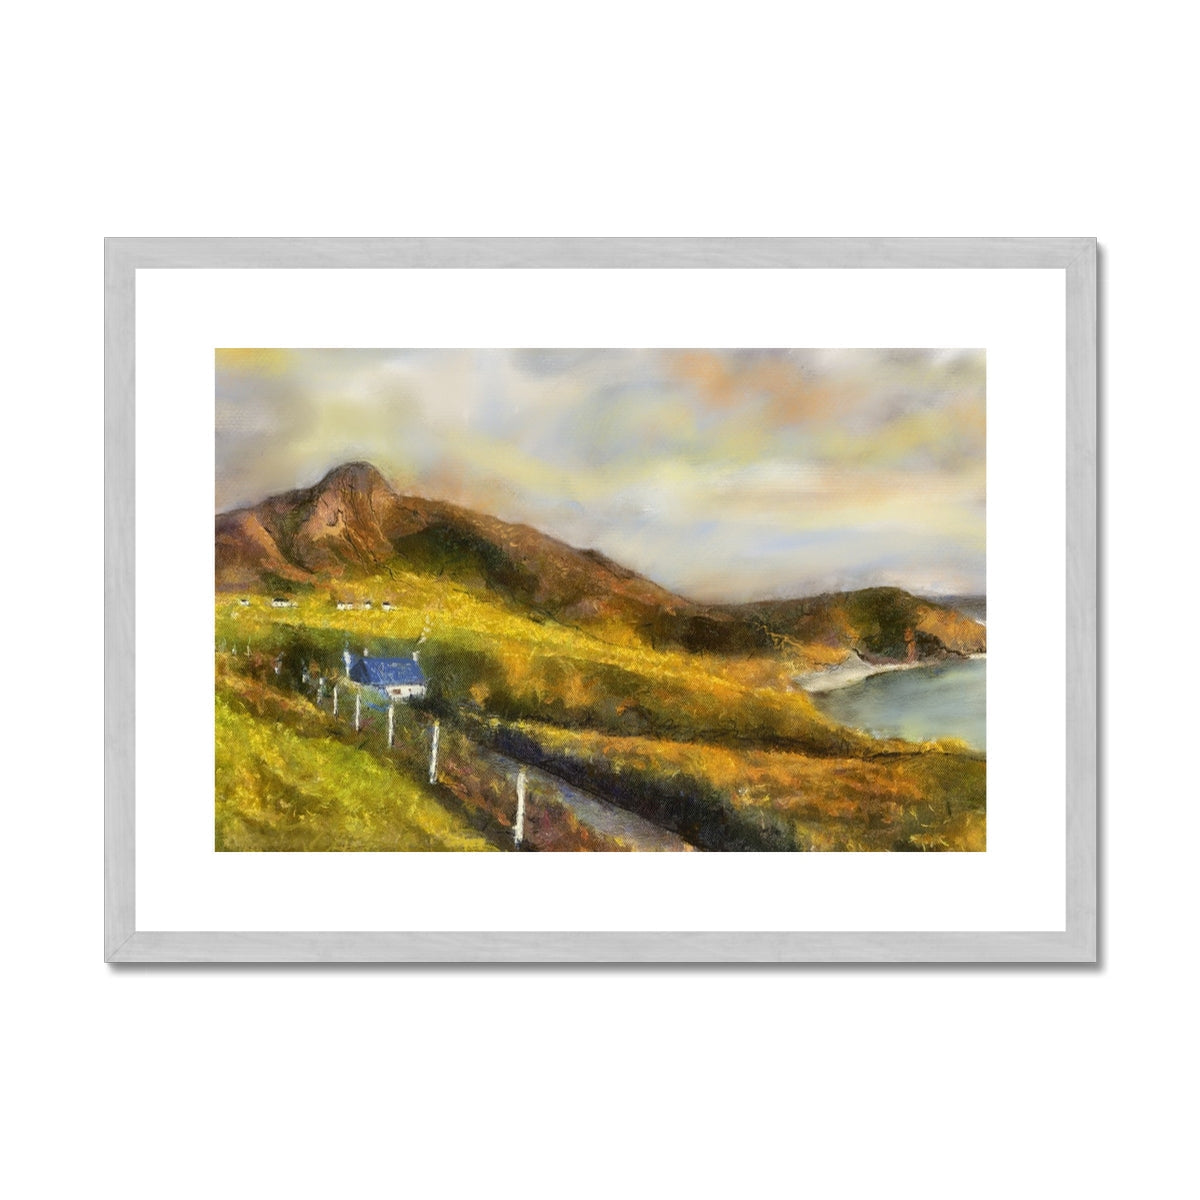 Coldbackie Painting | Antique Framed & Mounted Prints From Scotland-Antique Framed & Mounted Prints-Scottish Highlands & Lowlands Art Gallery-A2 Landscape-Silver Frame-Paintings, Prints, Homeware, Art Gifts From Scotland By Scottish Artist Kevin Hunter